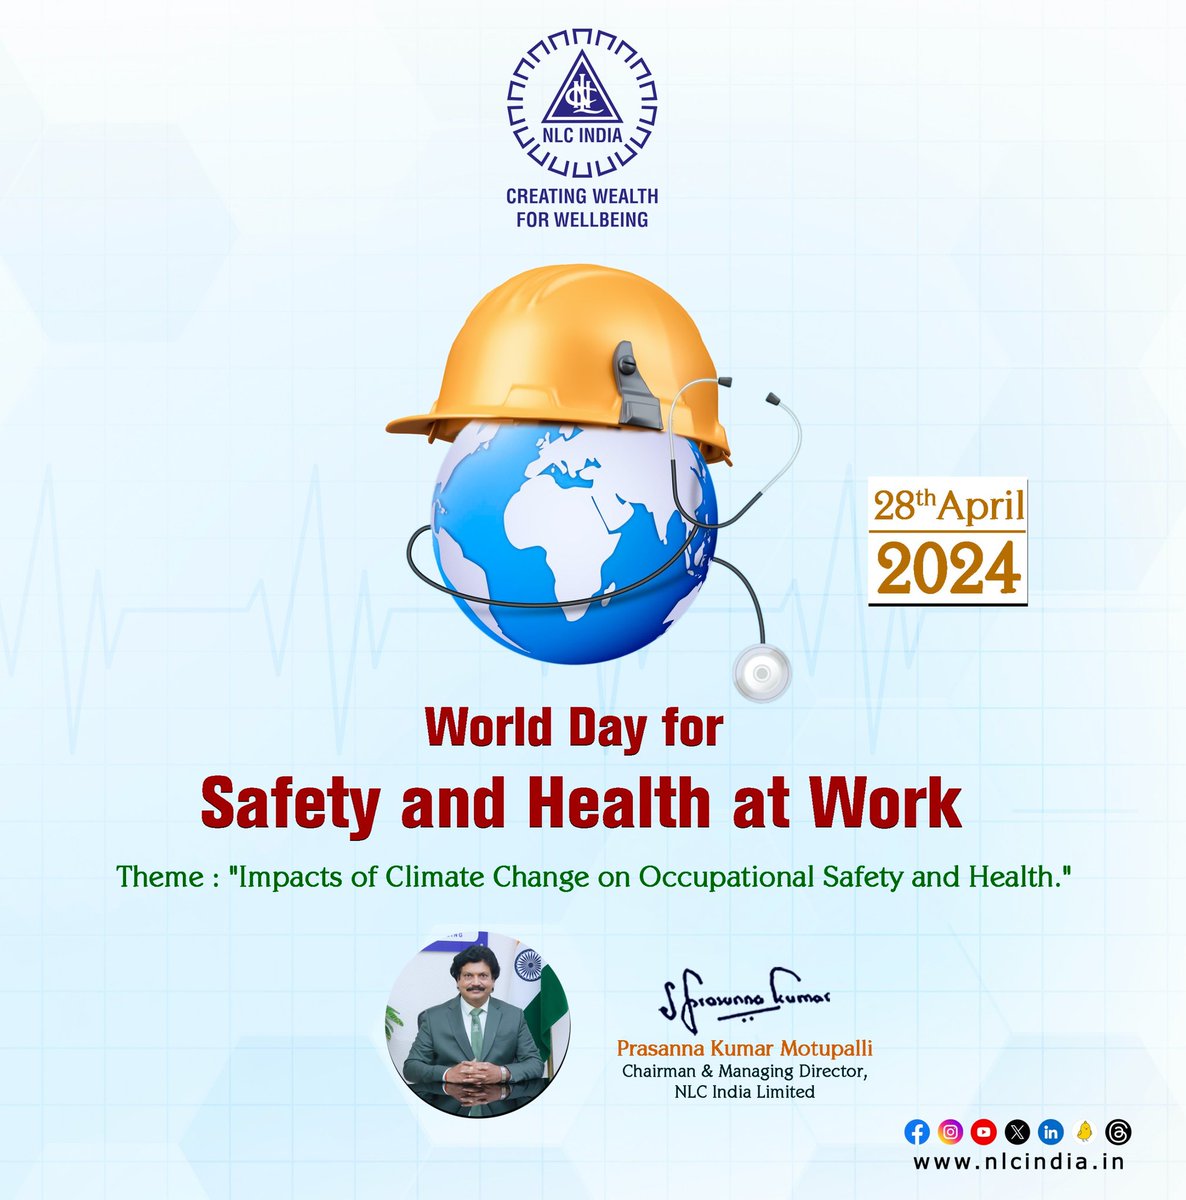 World Day for Safety and Health at Work 2024:

At NLCIL, we're committed to creating a safe and healthy environment for all our employees. Let's continue working together with our motto, 'Safety is our Top Most Priority!'

#ZeroHarm #SafetyFirst #HealthAtWork #NLCIL